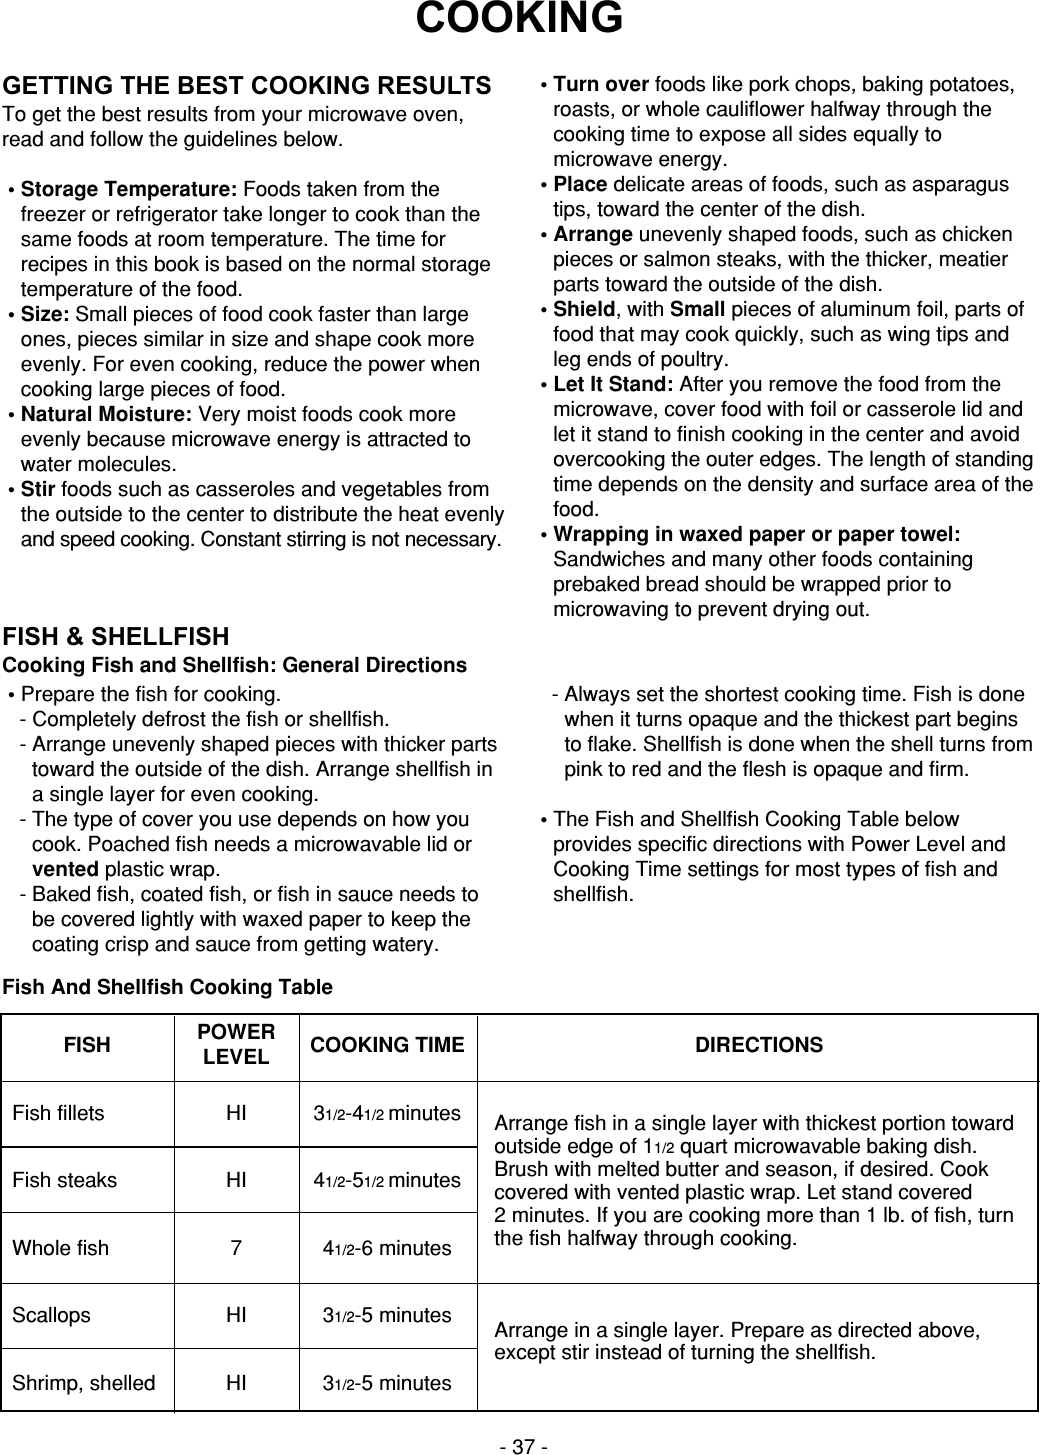 - 37 -COOKINGGETTING THE BEST COOKING RESULTS To get the best results from your microwave oven,read and follow the guidelines below.• Storage Temperature: Foods taken from thefreezer or refrigerator take longer to cook than thesame foods at room temperature. The time forrecipes in this book is based on the normal storagetemperature of the food.• Size: Small pieces of food cook faster than largeones, pieces similar in size and shape cook moreevenly. For even cooking, reduce the power whencooking large pieces of food.• Natural Moisture: Very moist foods cook moreevenly because microwave energy is attracted towater molecules.• Stir foods such as casseroles and vegetables fromthe outside to the center to distribute the heat evenlyand speed cooking. Constant stirring is not necessary.• Turn over foods like pork chops, baking potatoes,roasts, or whole cauliflower halfway through thecooking time to expose all sides equally tomicrowave energy.• Place delicate areas of foods, such as asparagustips, toward the center of the dish.• Arrange unevenly shaped foods, such as chickenpieces or salmon steaks, with the thicker, meatierparts toward the outside of the dish.• Shield, with Small pieces of aluminum foil, parts offood that may cook quickly, such as wing tips andleg ends of poultry.• Let It Stand: After you remove the food from themicrowave, cover food with foil or casserole lid andlet it stand to finish cooking in the center and avoidovercooking the outer edges. The length of standingtime depends on the density and surface area of thefood.• Wrapping in waxed paper or paper towel:Sandwiches and many other foods containingprebaked bread should be wrapped prior tomicrowaving to prevent drying out.FISH &amp; SHELLFISHCooking Fish and Shellfish: General Directions• Prepare the fish for cooking.- Completely defrost the fish or shellfish.- Arrange unevenly shaped pieces with thicker partstoward the outside of the dish. Arrange shellfish ina single layer for even cooking.- The type of cover you use depends on how youcook. Poached fish needs a microwavable lid orvented plastic wrap.- Baked fish, coated fish, or fish in sauce needs tobe covered lightly with waxed paper to keep thecoating crisp and sauce from getting watery.- Always set the shortest cooking time. Fish is donewhen it turns opaque and the thickest part beginsto flake. Shellfish is done when the shell turns frompink to red and the flesh is opaque and firm.• The Fish and Shellfish Cooking Table belowprovides specific directions with Power Level andCooking Time settings for most types of fish andshellfish.Fish And Shellfish Cooking TableFISHFish filletsFish steaksWhole fishScallopsShrimp, shelledHIHI7HIHI31/2-41/2 minutes41/2-51/2 minutes41/2-6 minutes31/2-5 minutes31/2-5 minutesArrange fish in a single layer with thickest portion towardoutside edge of 11/2 quart microwavable baking dish.Brush with melted butter and season, if desired. Cookcovered with vented plastic wrap. Let stand covered 2 minutes. If you are cooking more than 1 lb. of fish, turnthe fish halfway through cooking.Arrange in a single layer. Prepare as directed above,except stir instead of turning the shellfish.POWERLEVEL COOKING TIME DIRECTIONS